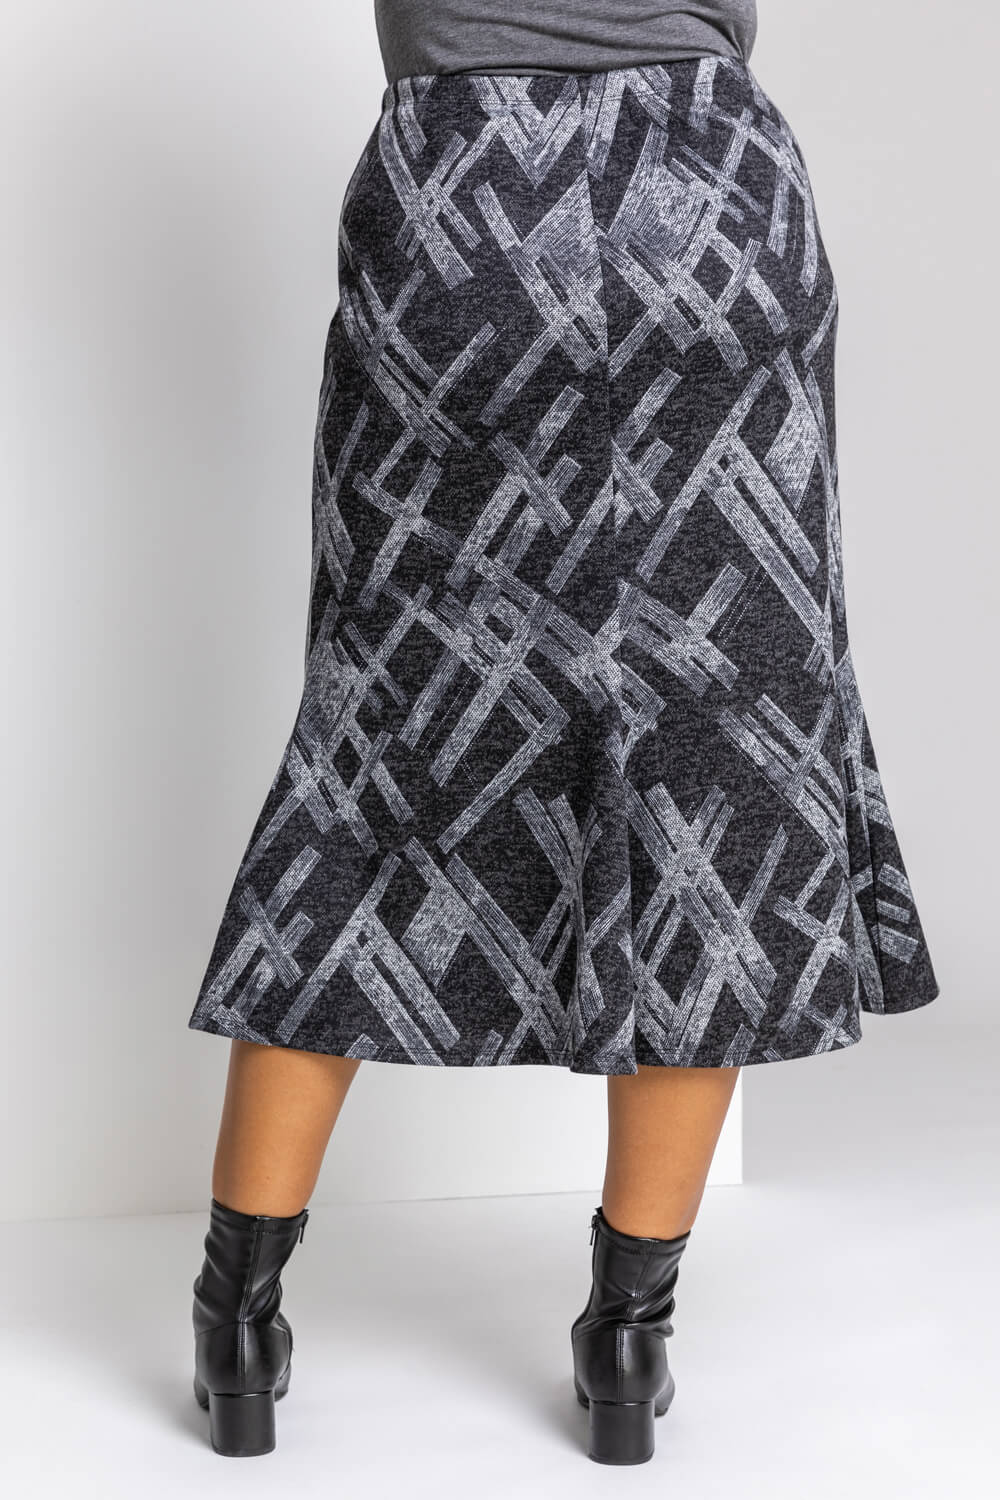 Dark Grey Curve Abstract Cross Print Fluted Skirt, Image 2 of 4